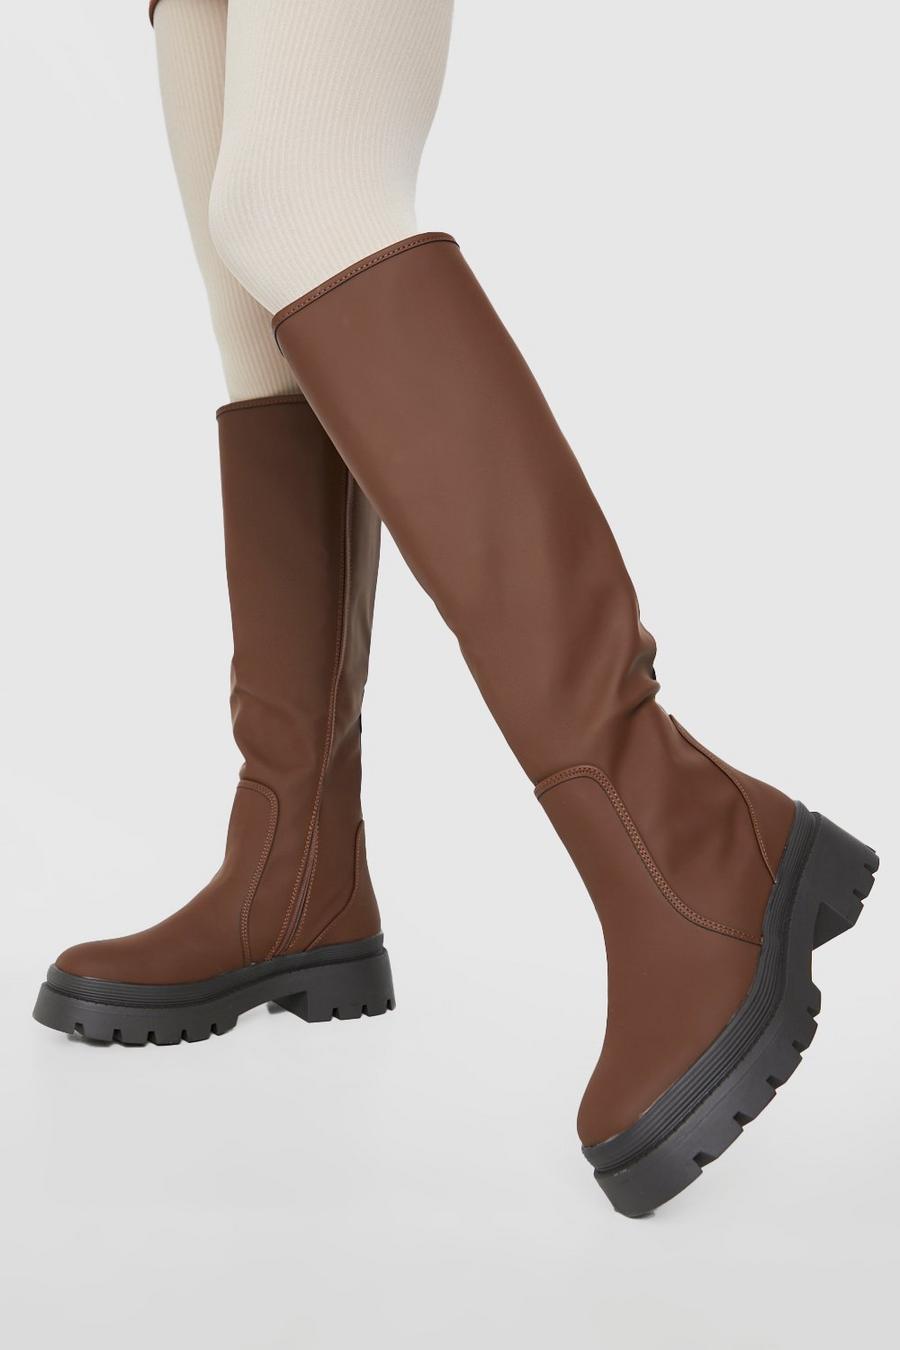 Chocolate brown Rubber Knee High Boots